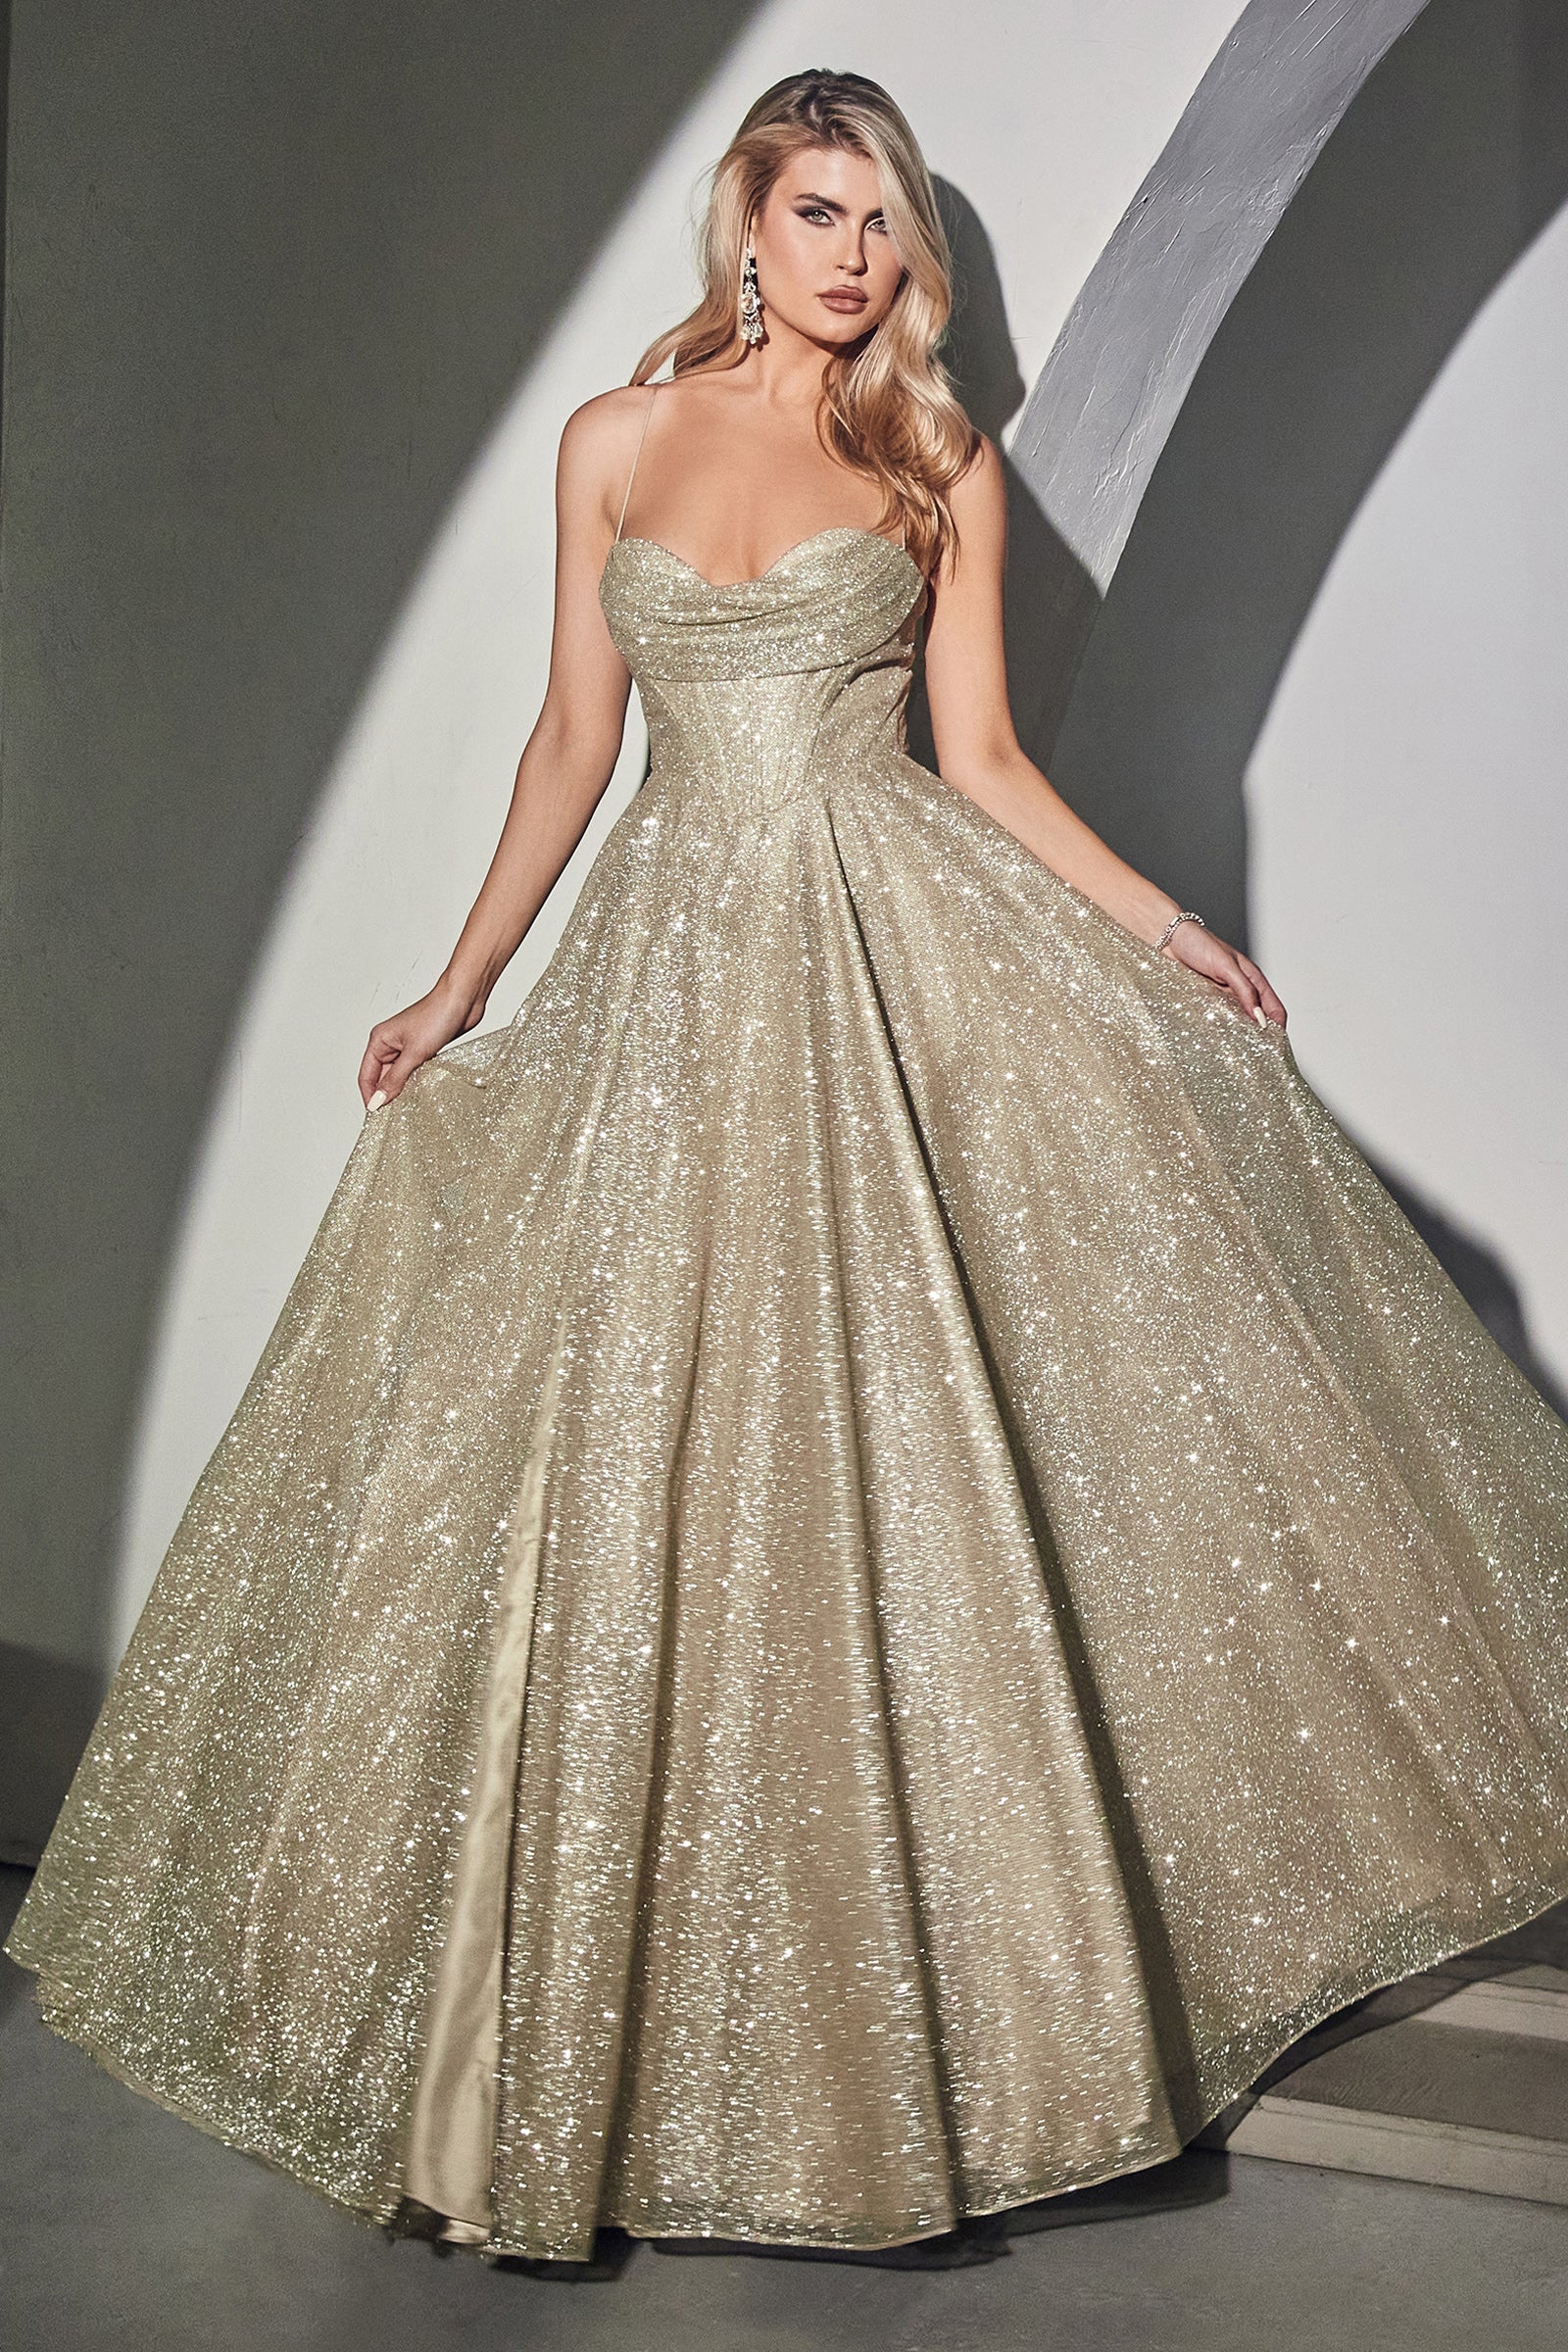 Debut Ball Gowns & Sweet 18 Birthday Dresses